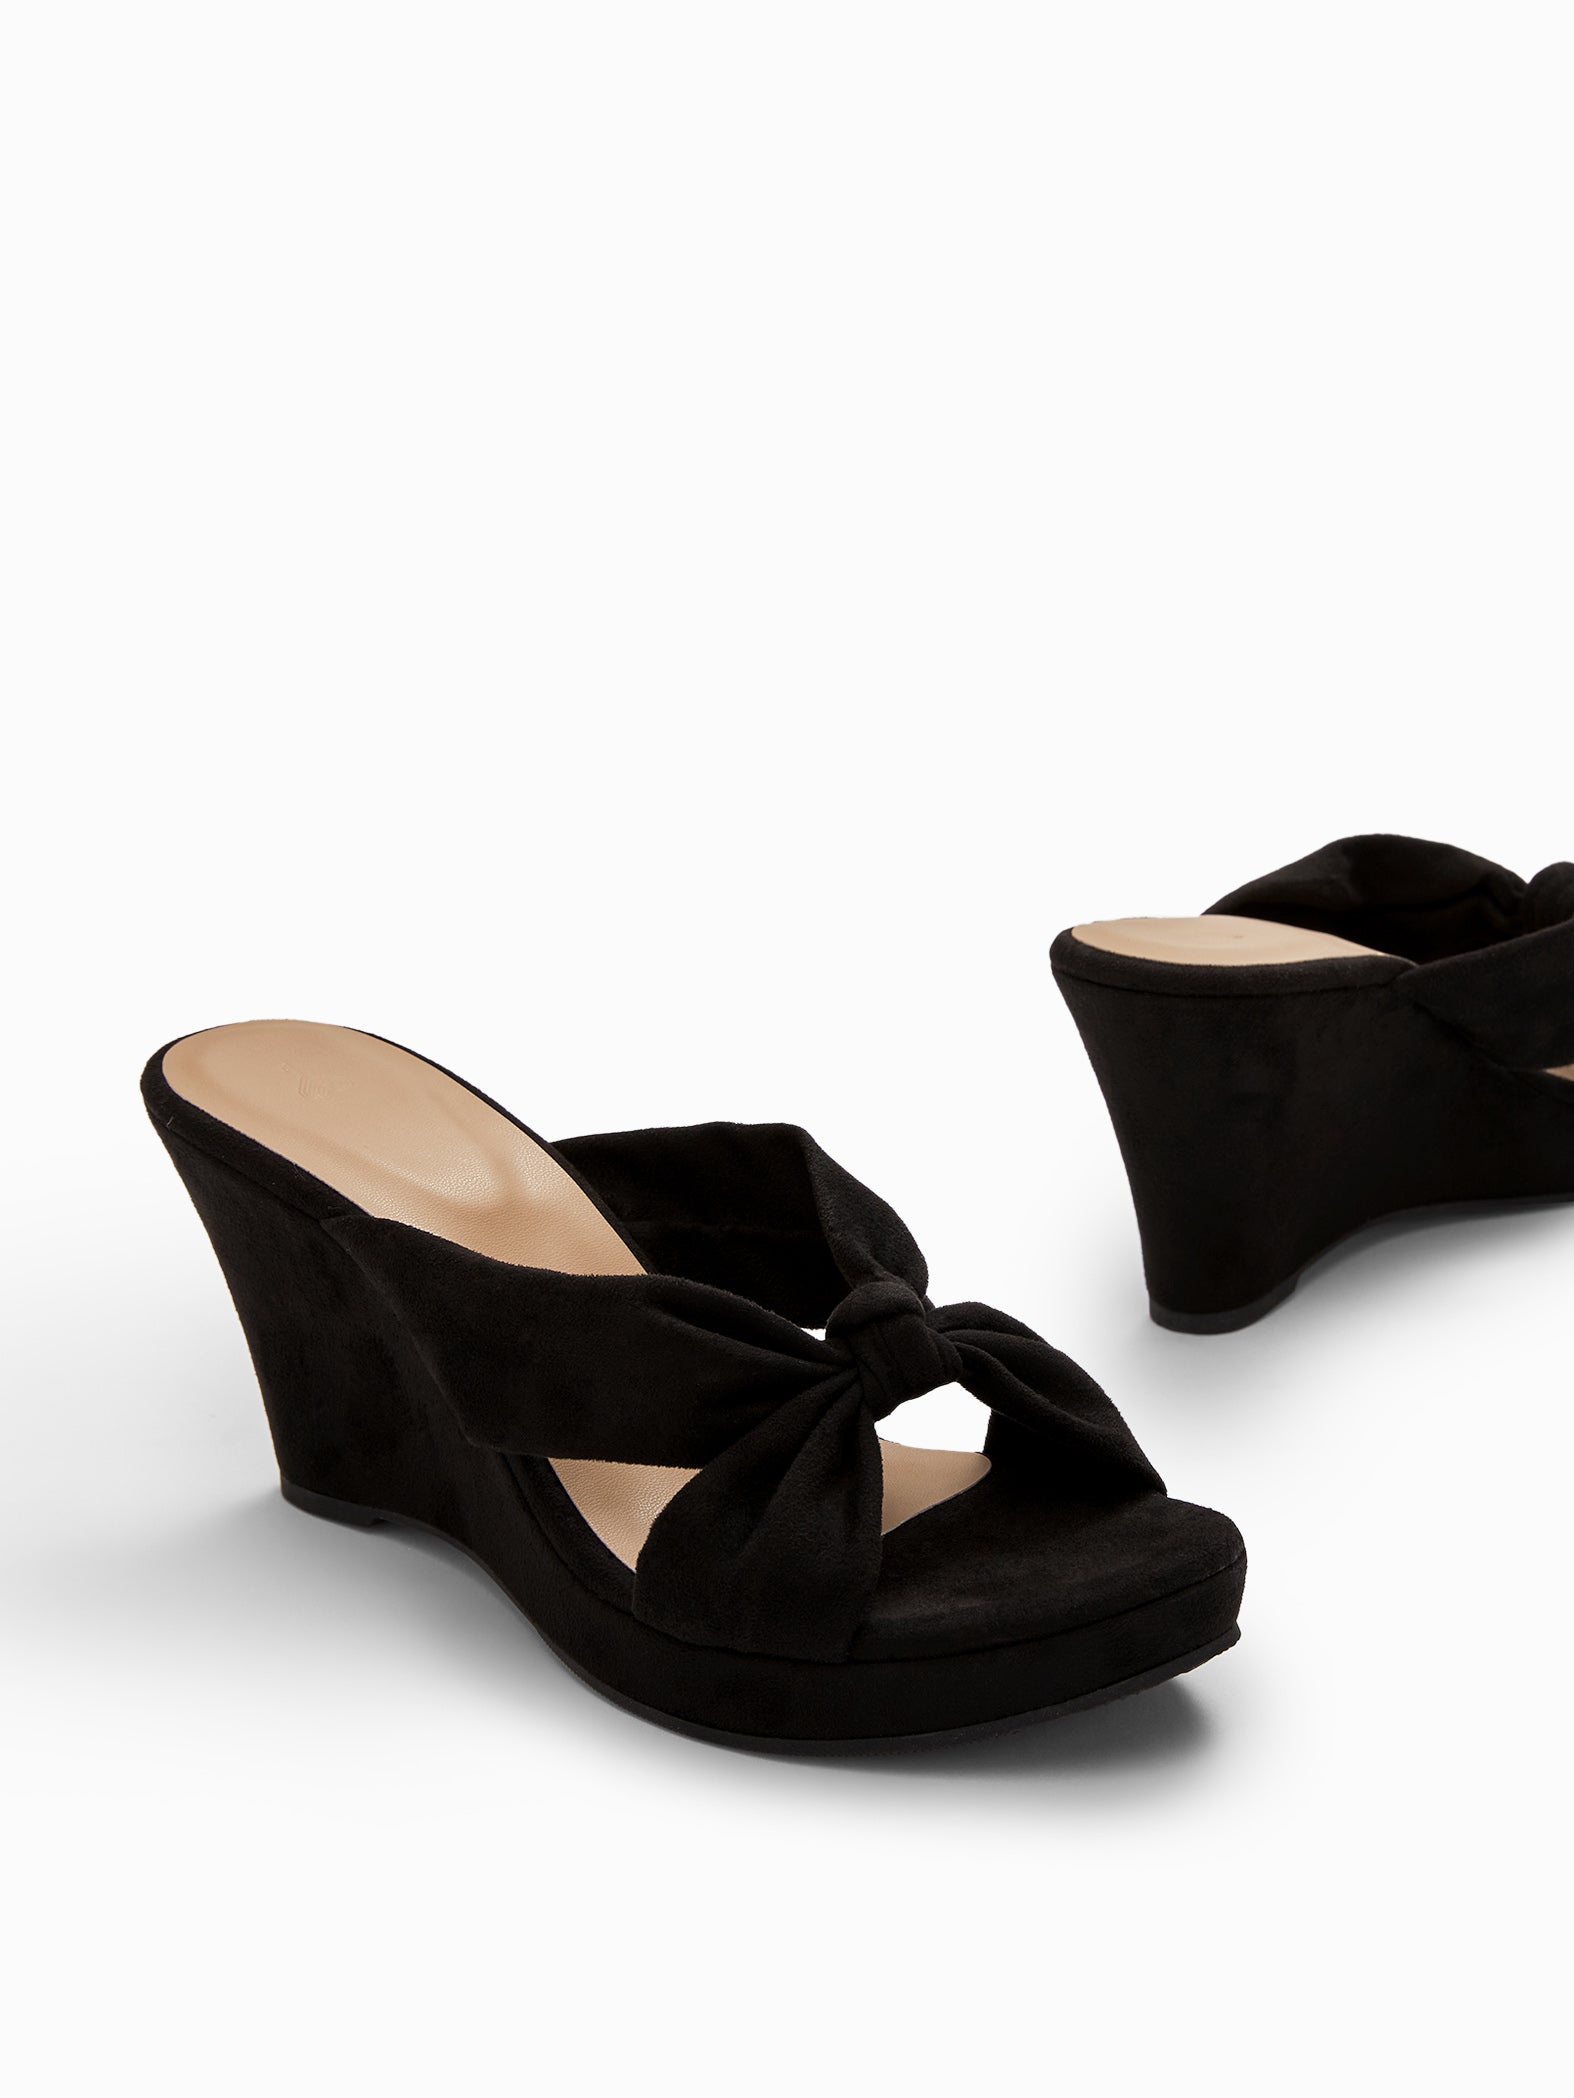 Black Suede Knotted Wedges